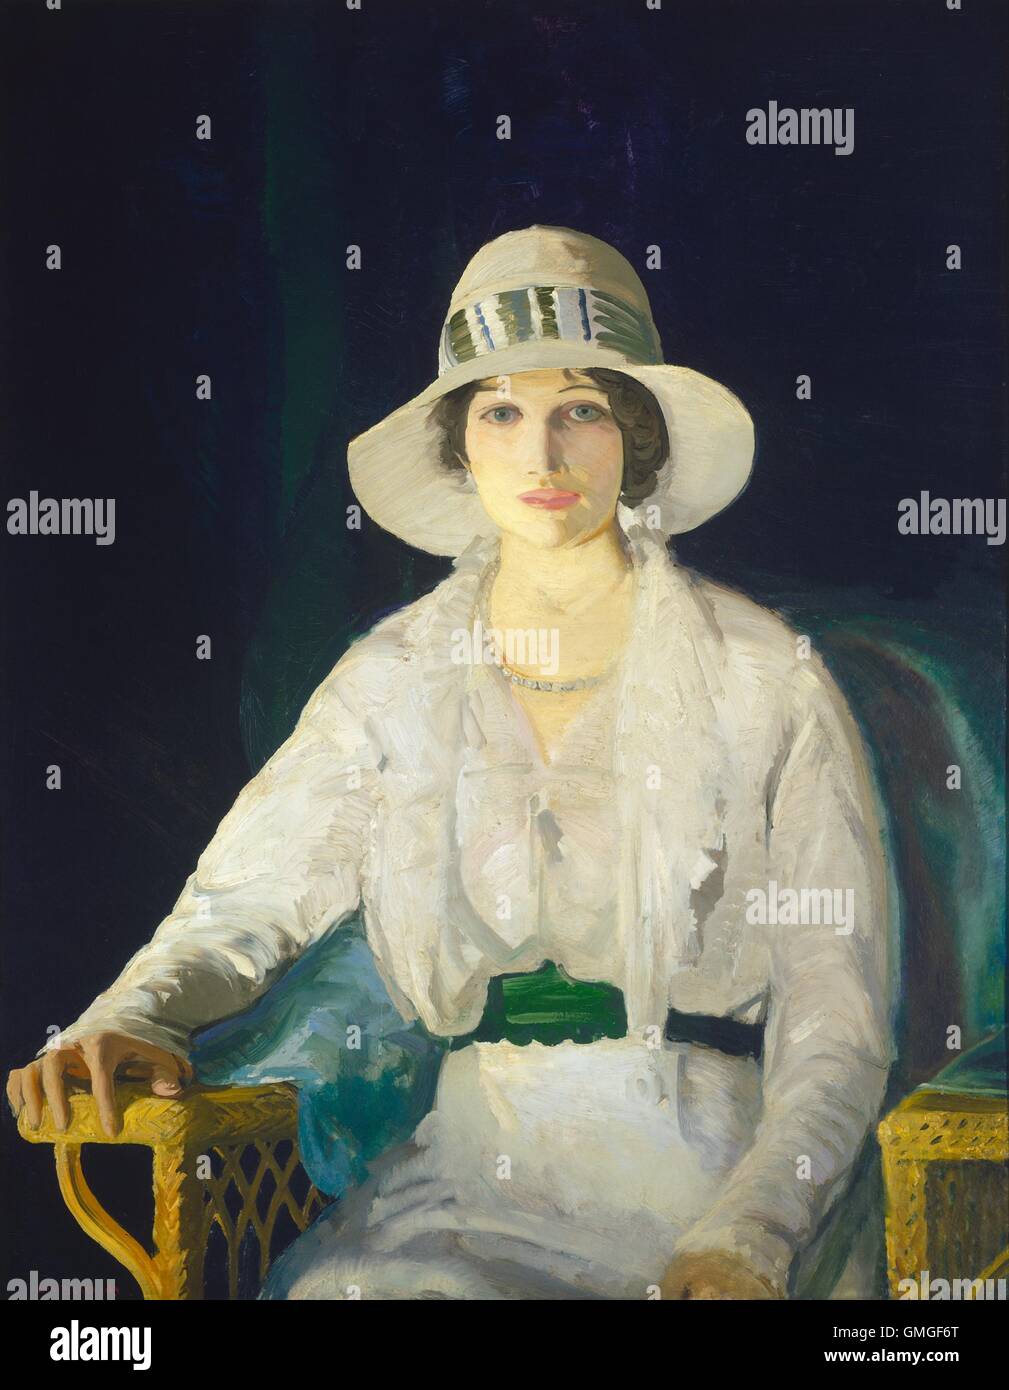 Florence Davey, by George Bellows, 1914, American painting, oil on canvas. Bellows painted this portrait in a more conventional Stock Photo